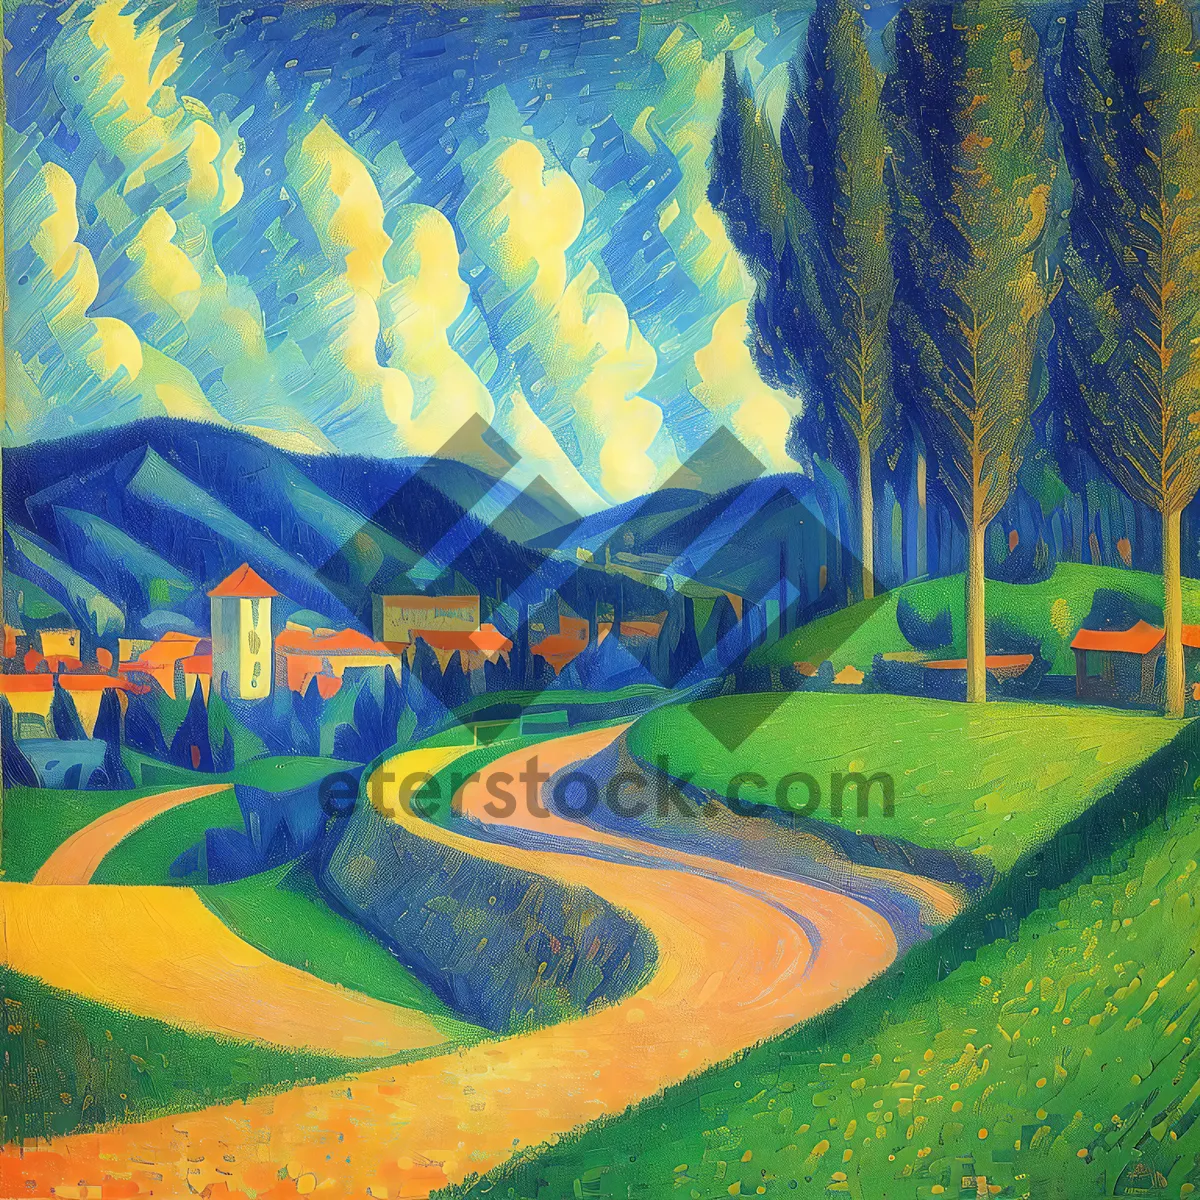 Picture of Scenic Golf Course Landscape with Chalk Drawings